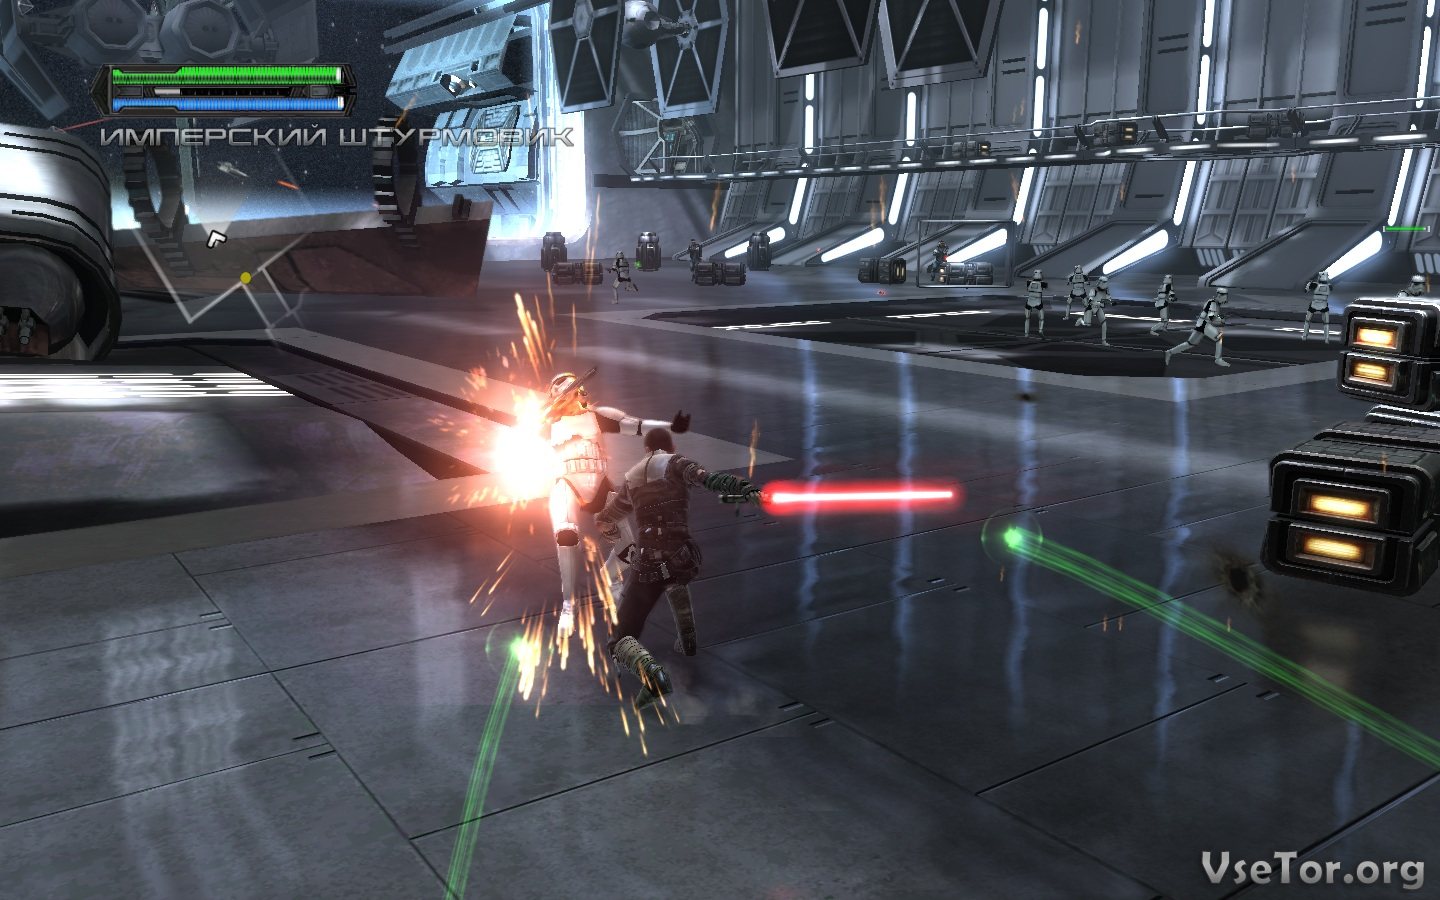 Сила стар игра. Star Wars the Force unleashed Ultimate Sith Edition (2009). Star Wars the Force unleashed 1. Star Wars: the Force unleashed - Ultimate Sith Edition. Star Wars: the Force unleashed 1/2.